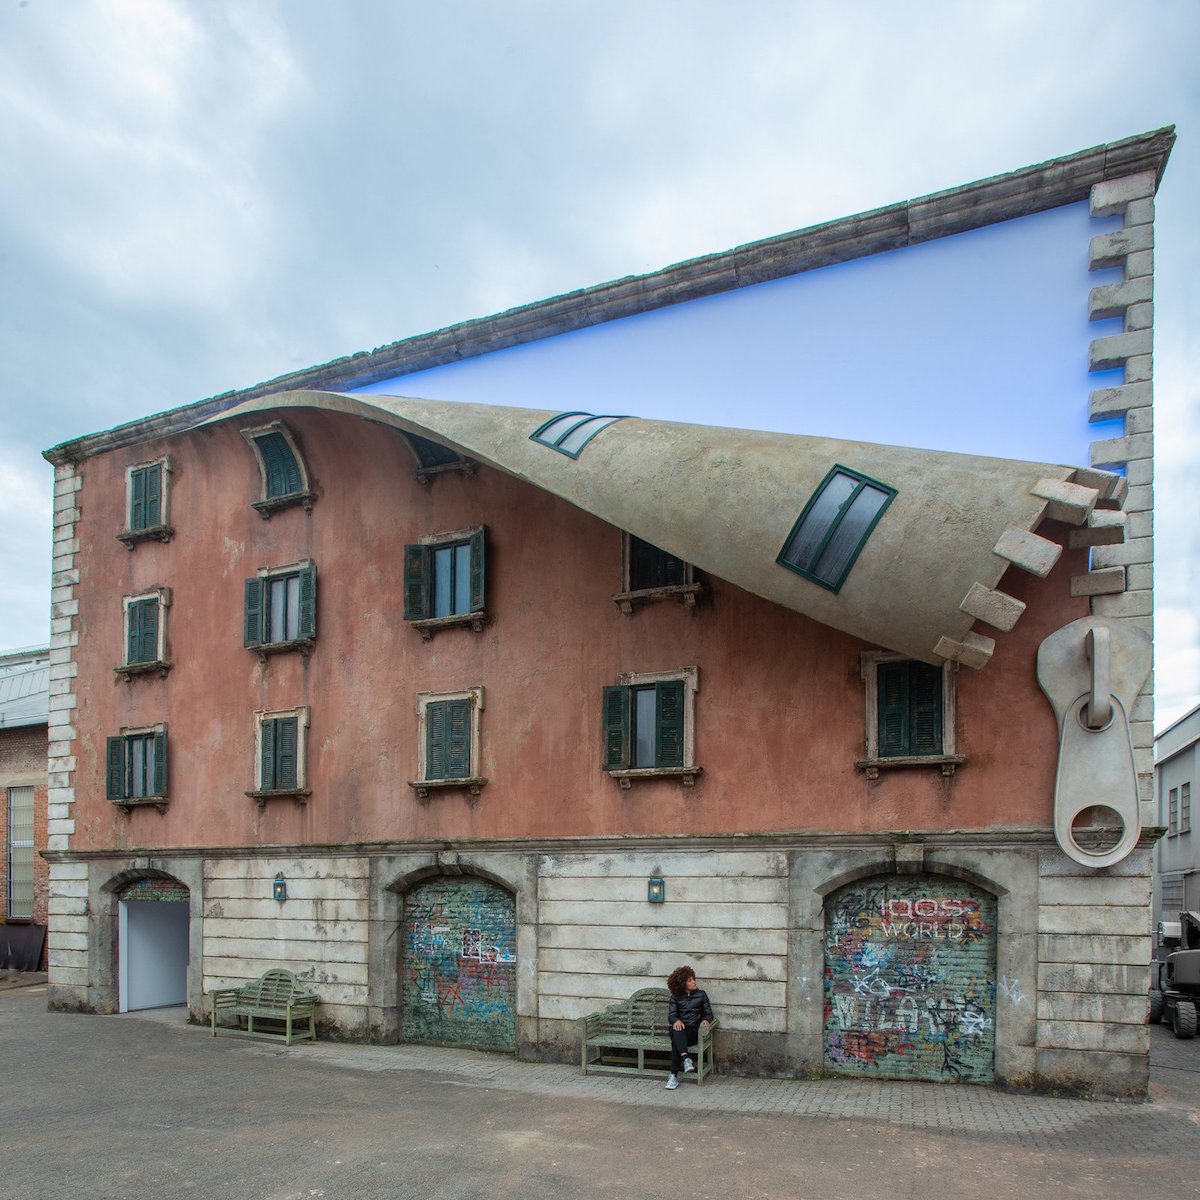 Sculptor 'Unzips' A Building In Milan With His Mind-Blowing Art Installation